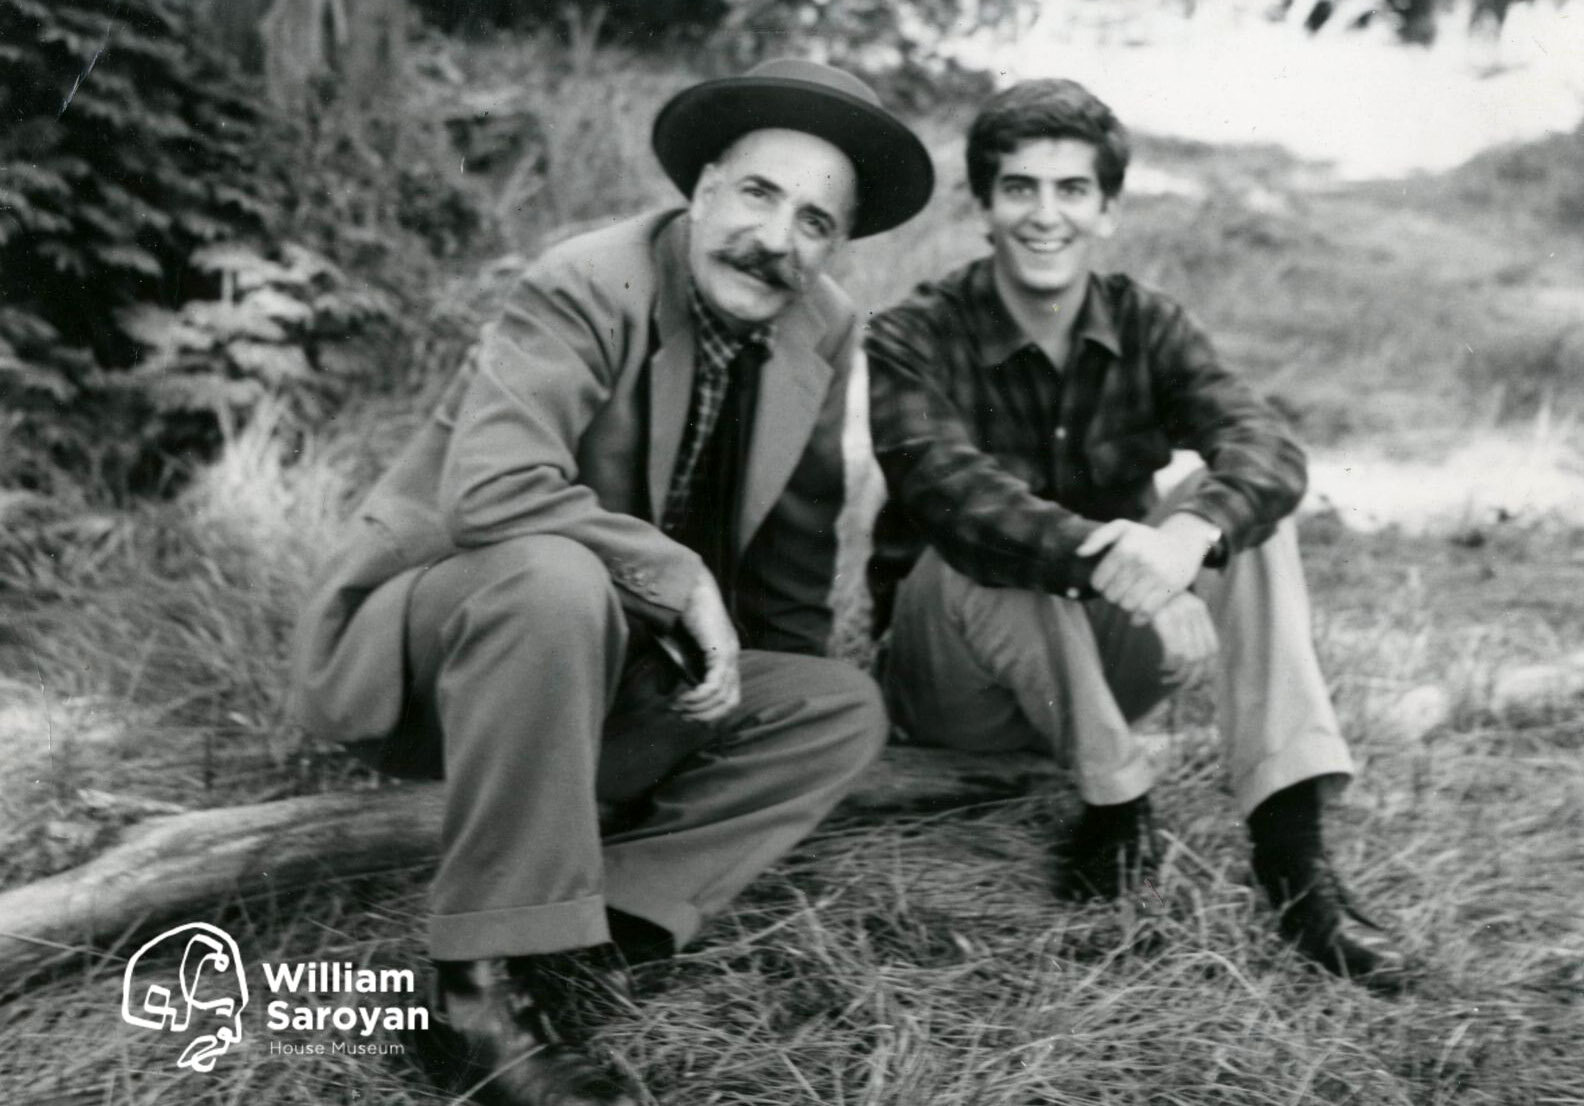 William and Aram Saroyan (photo courtesy William Saroyan House Museum, from the collection of Charles Janigian).